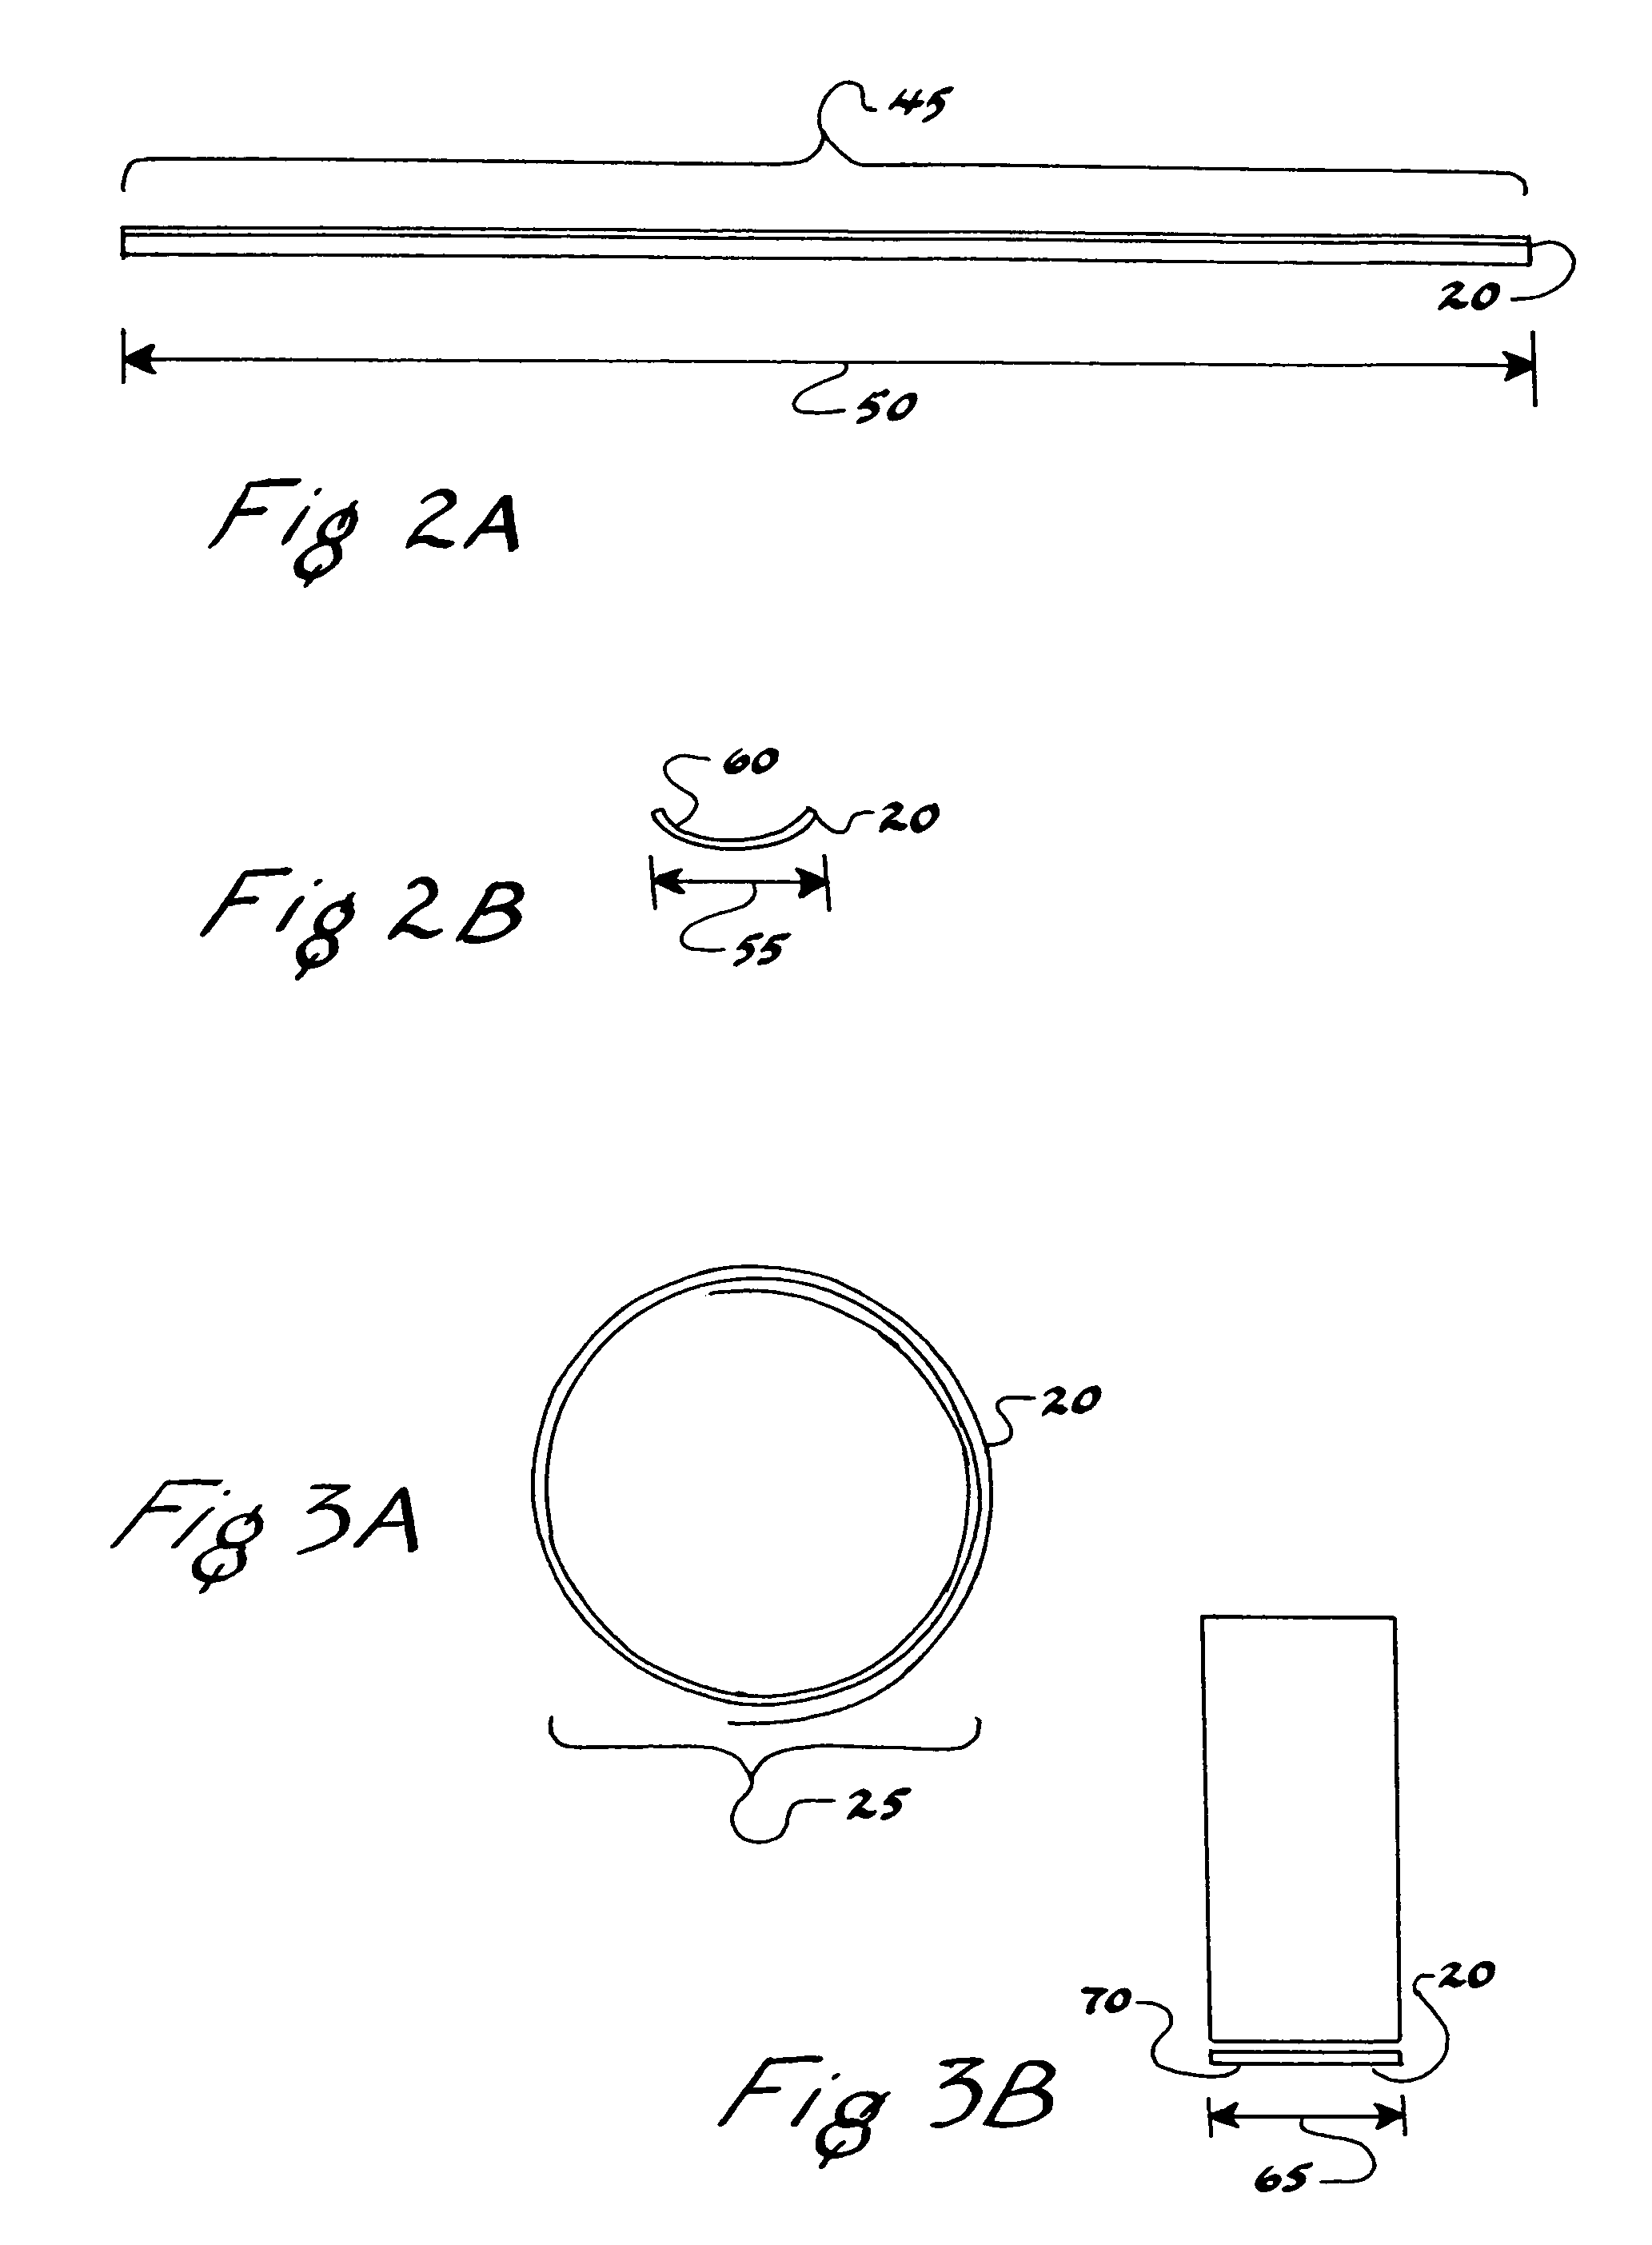 Devices incorporating a bi-stable ribbon spring